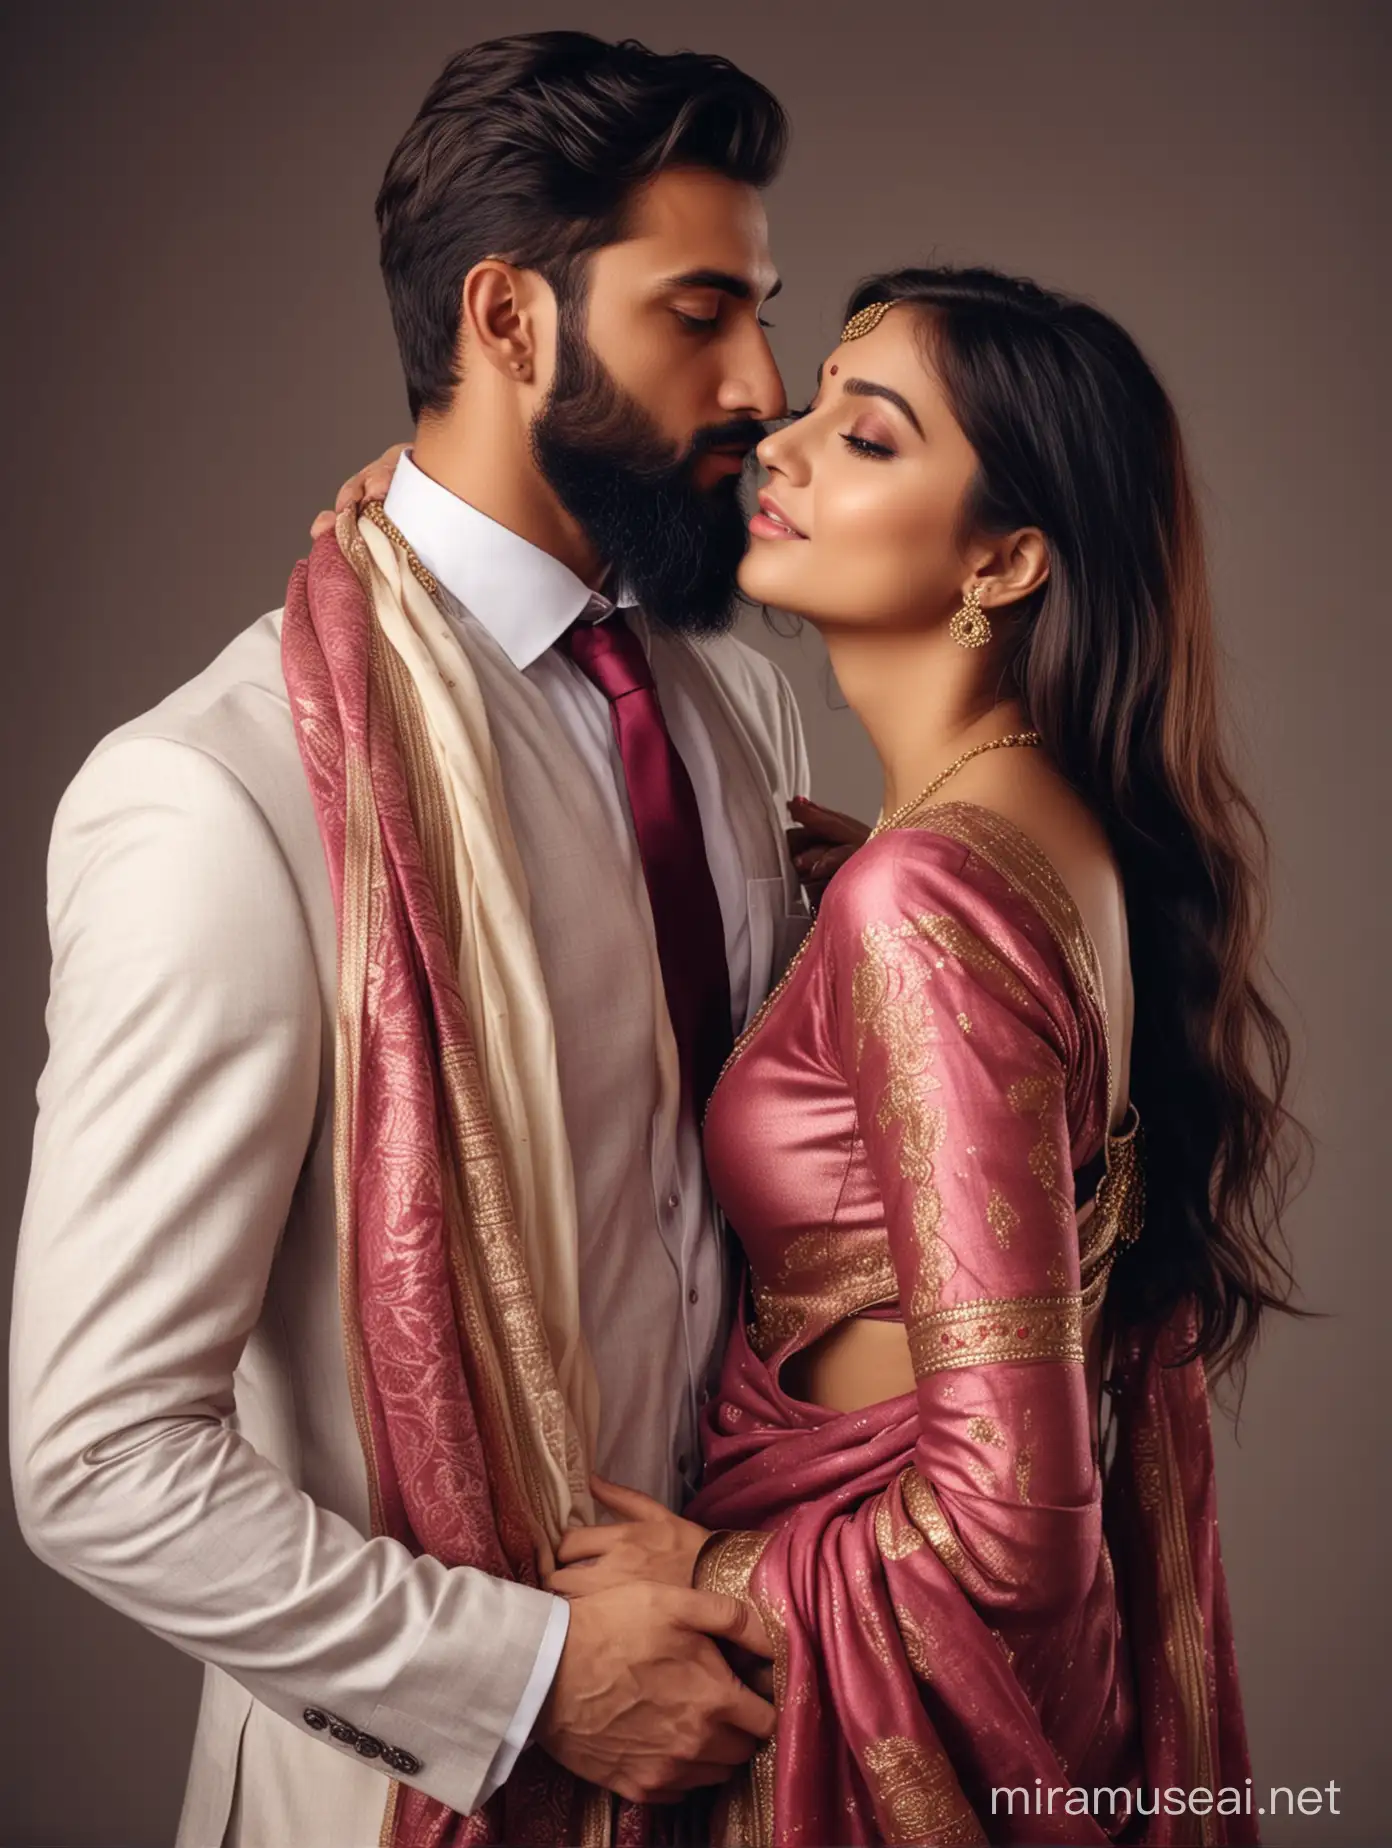 Embracing Love Stunning EuropeanIndian Couple in Traditional Attire and Formal Wear